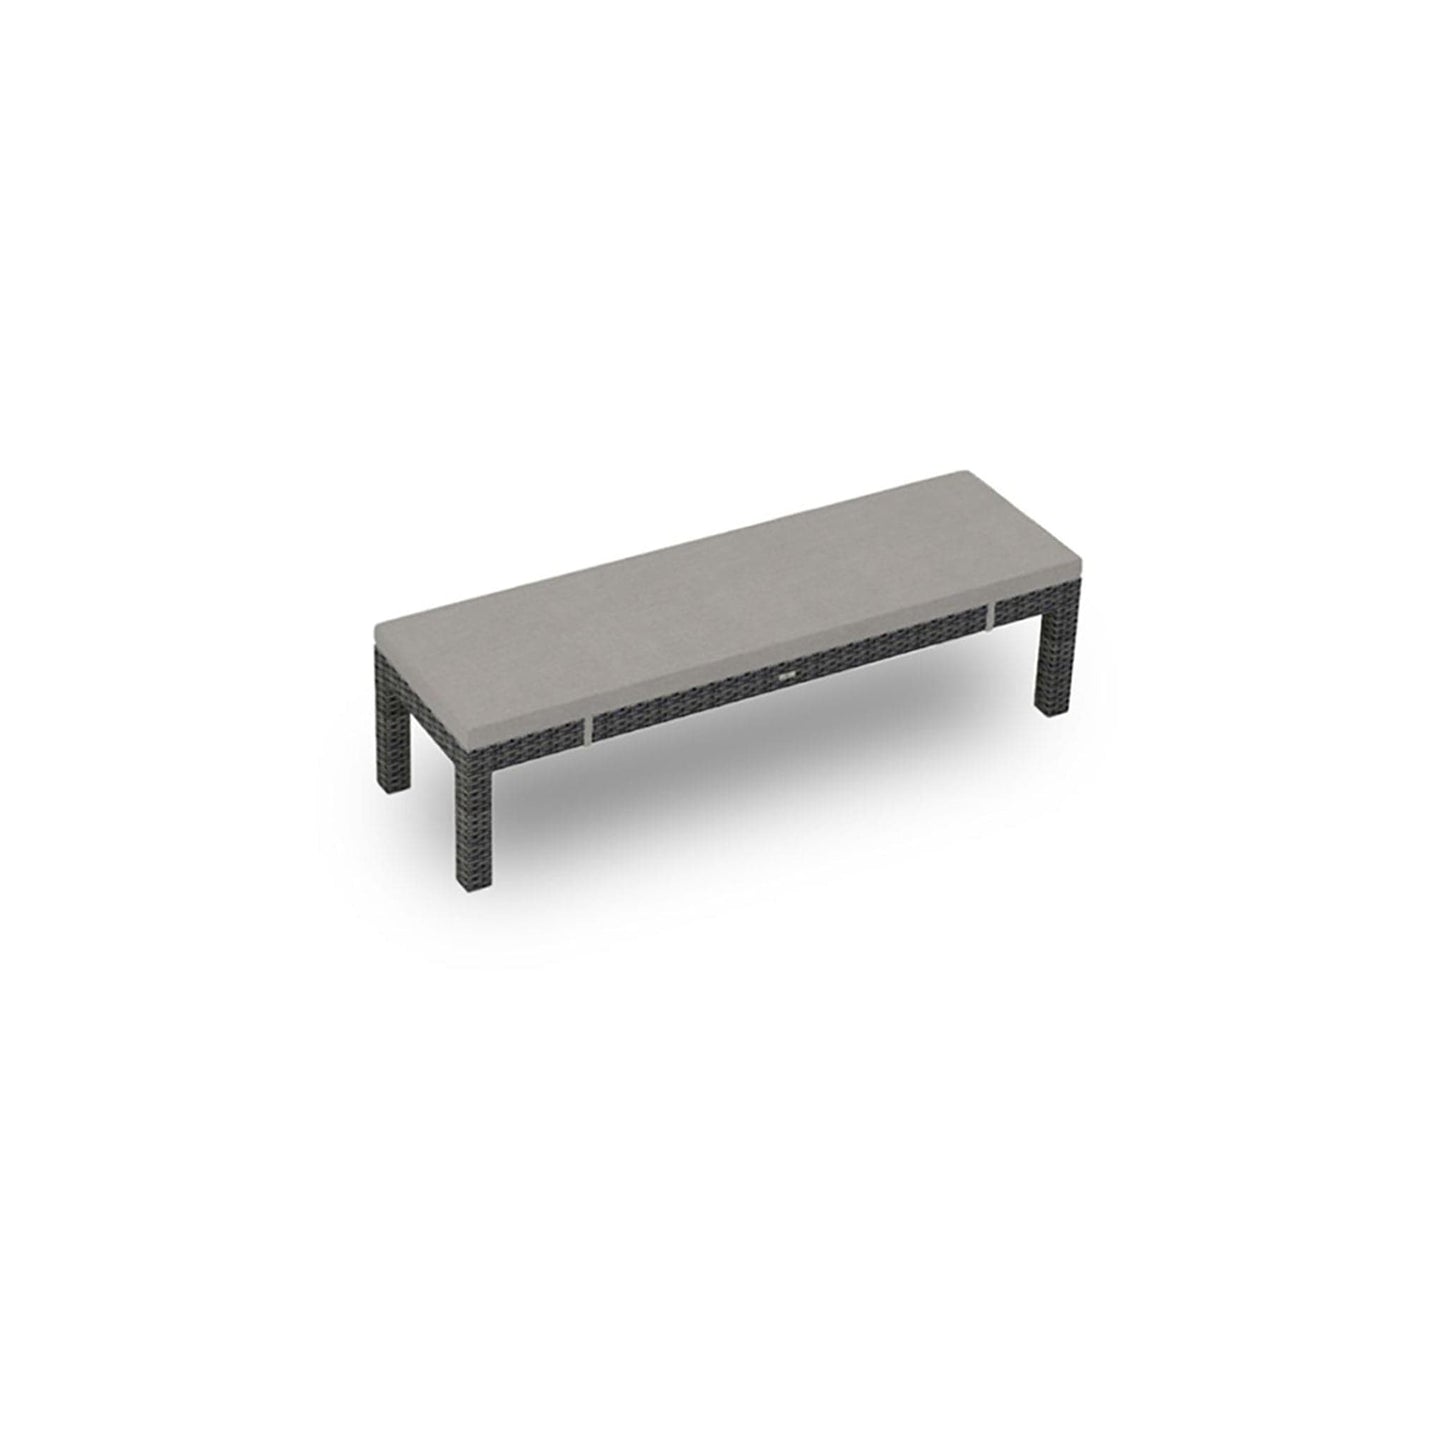 District 3-Seater Dining Bench